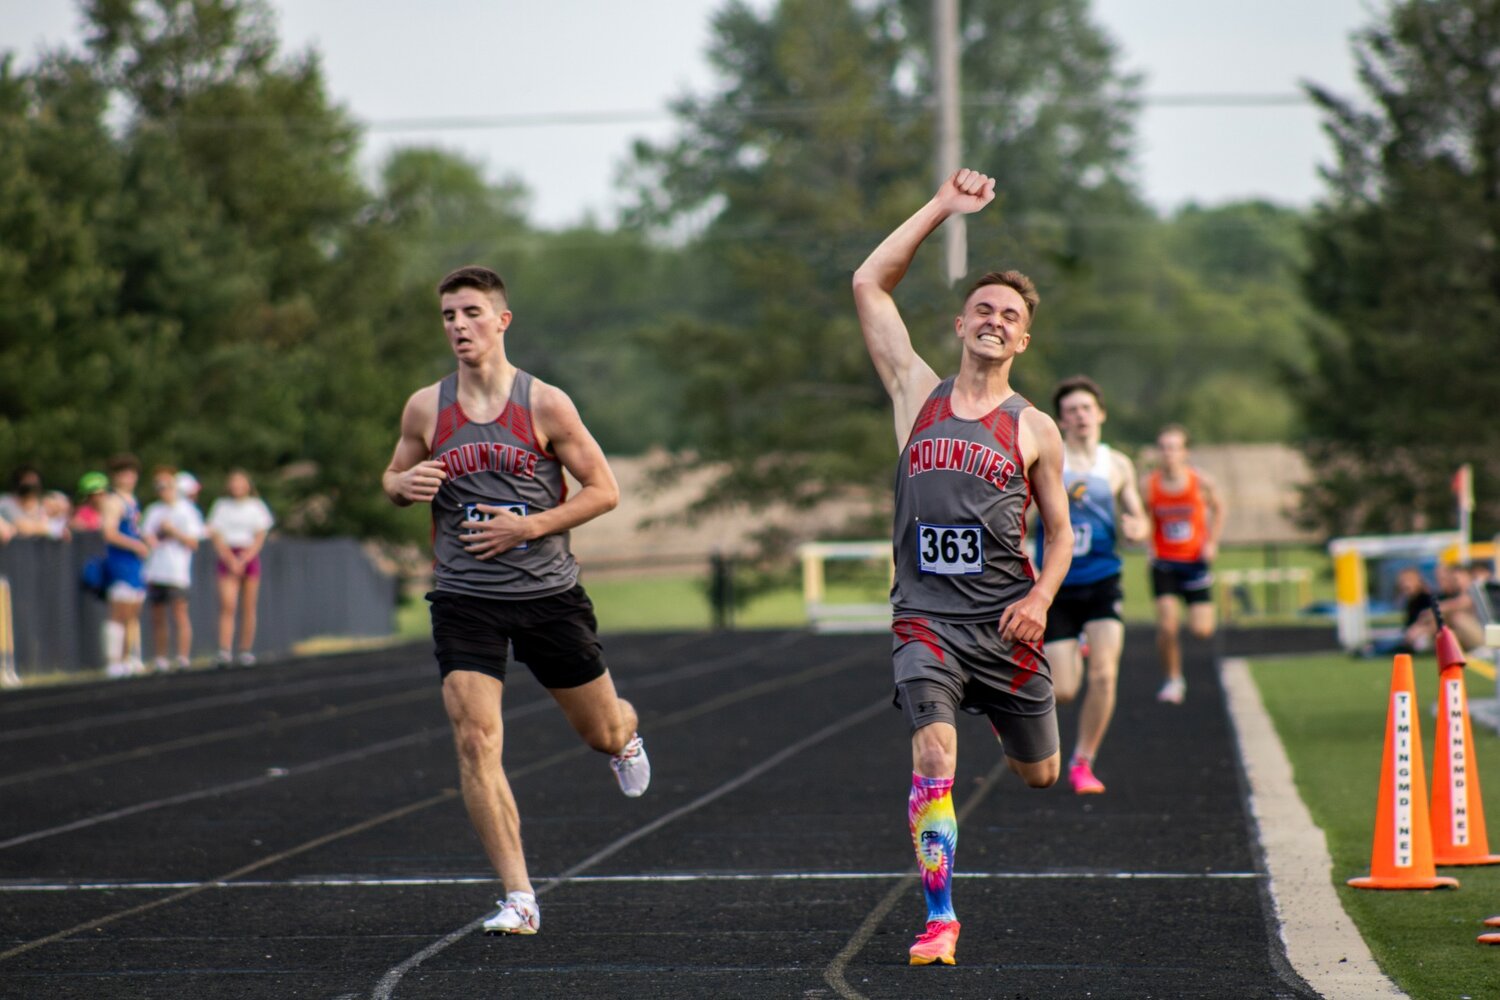 Southmont's Mason Cass and Vince Reimondo went 1-2 in the 1600 and helped the Mounties win their 3rd straight county title.